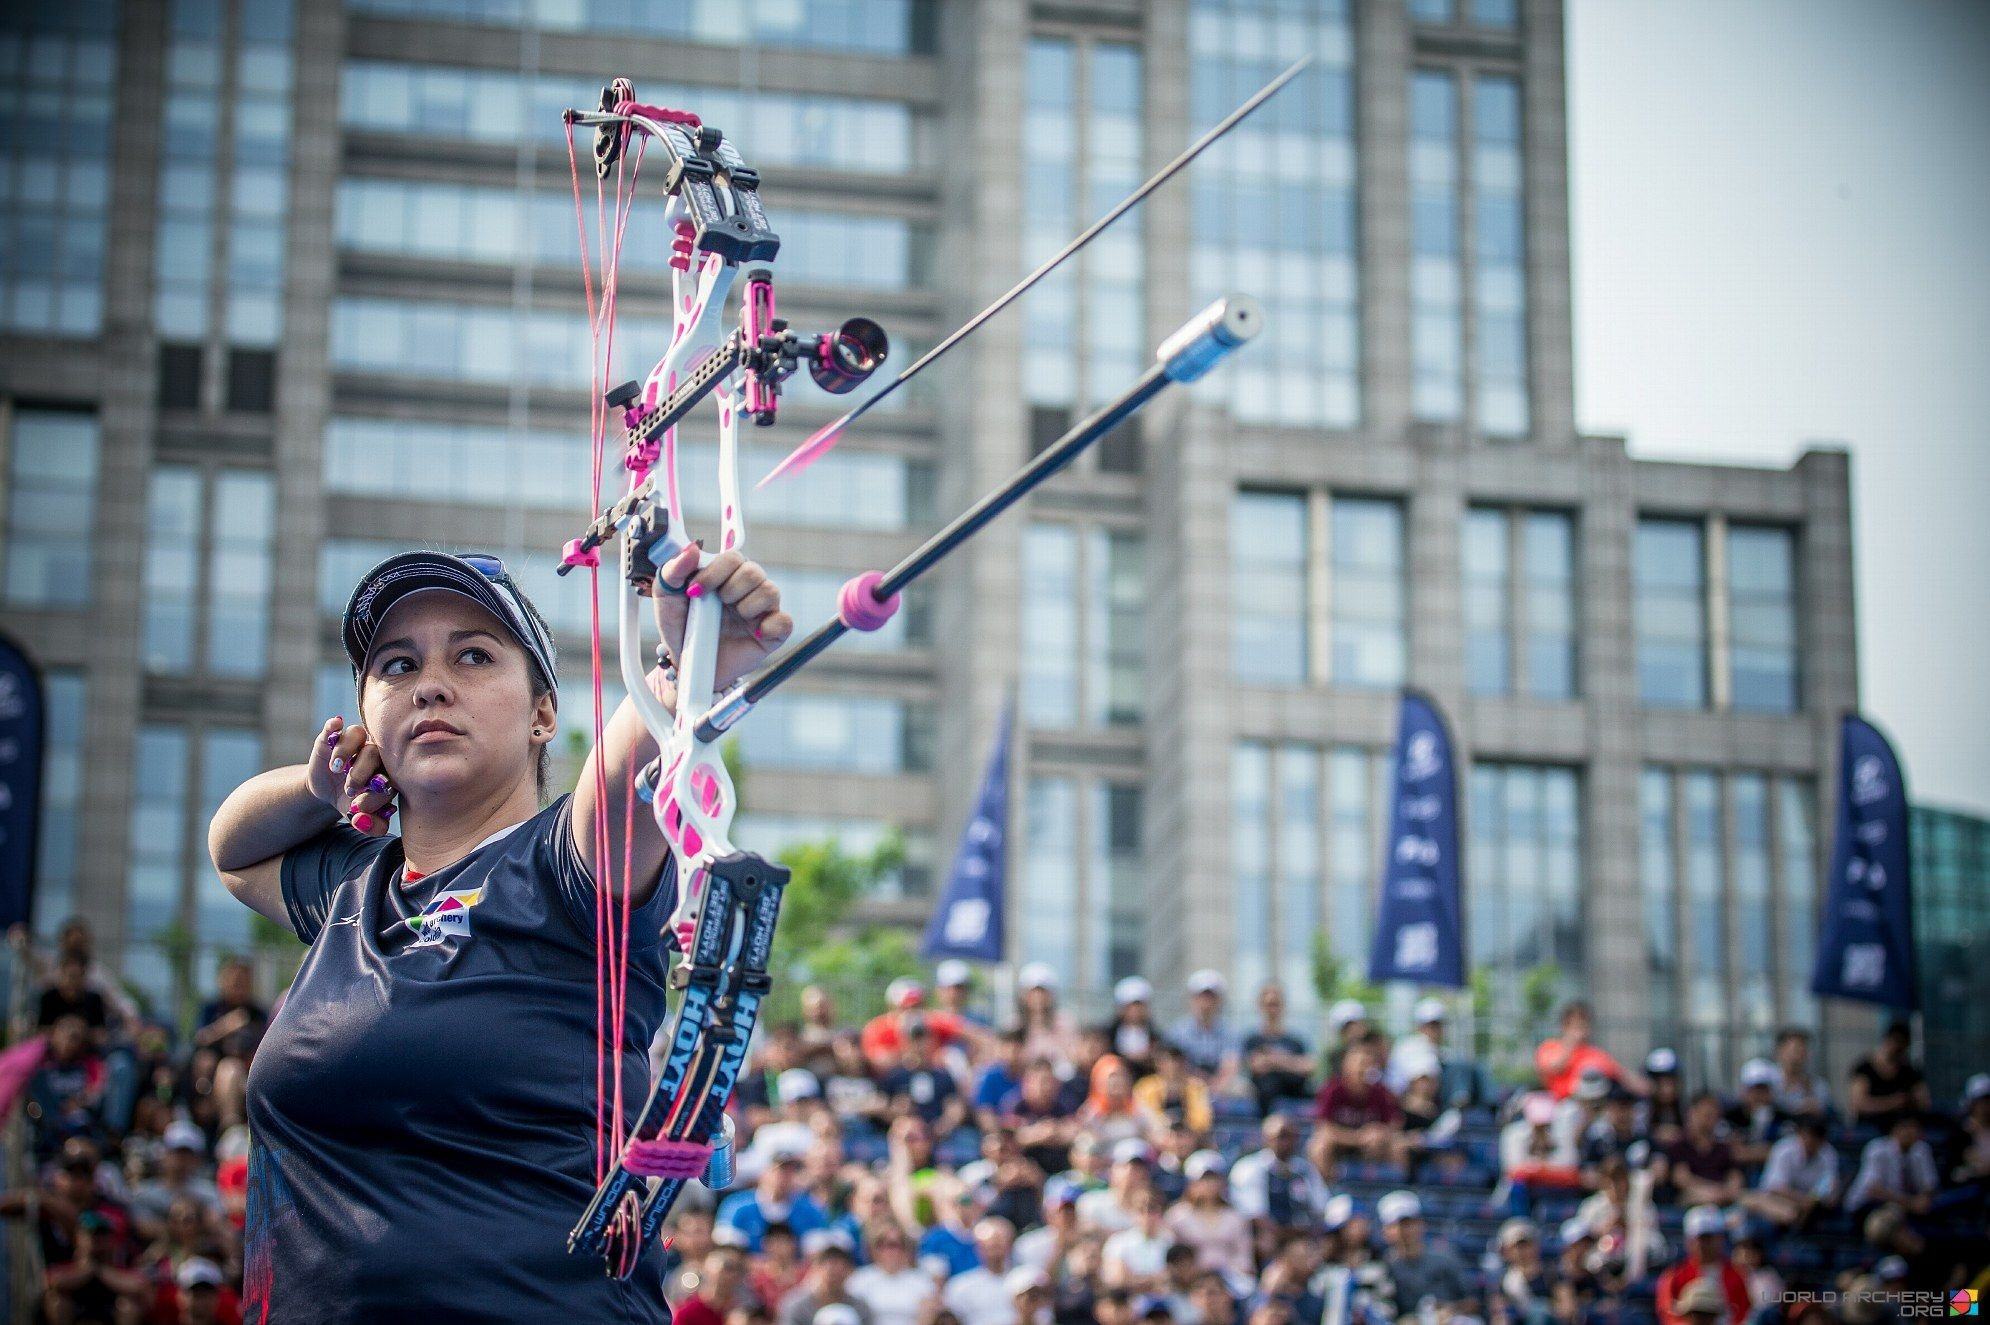 López looking to regain women's compound crown at Archery World Cup Final